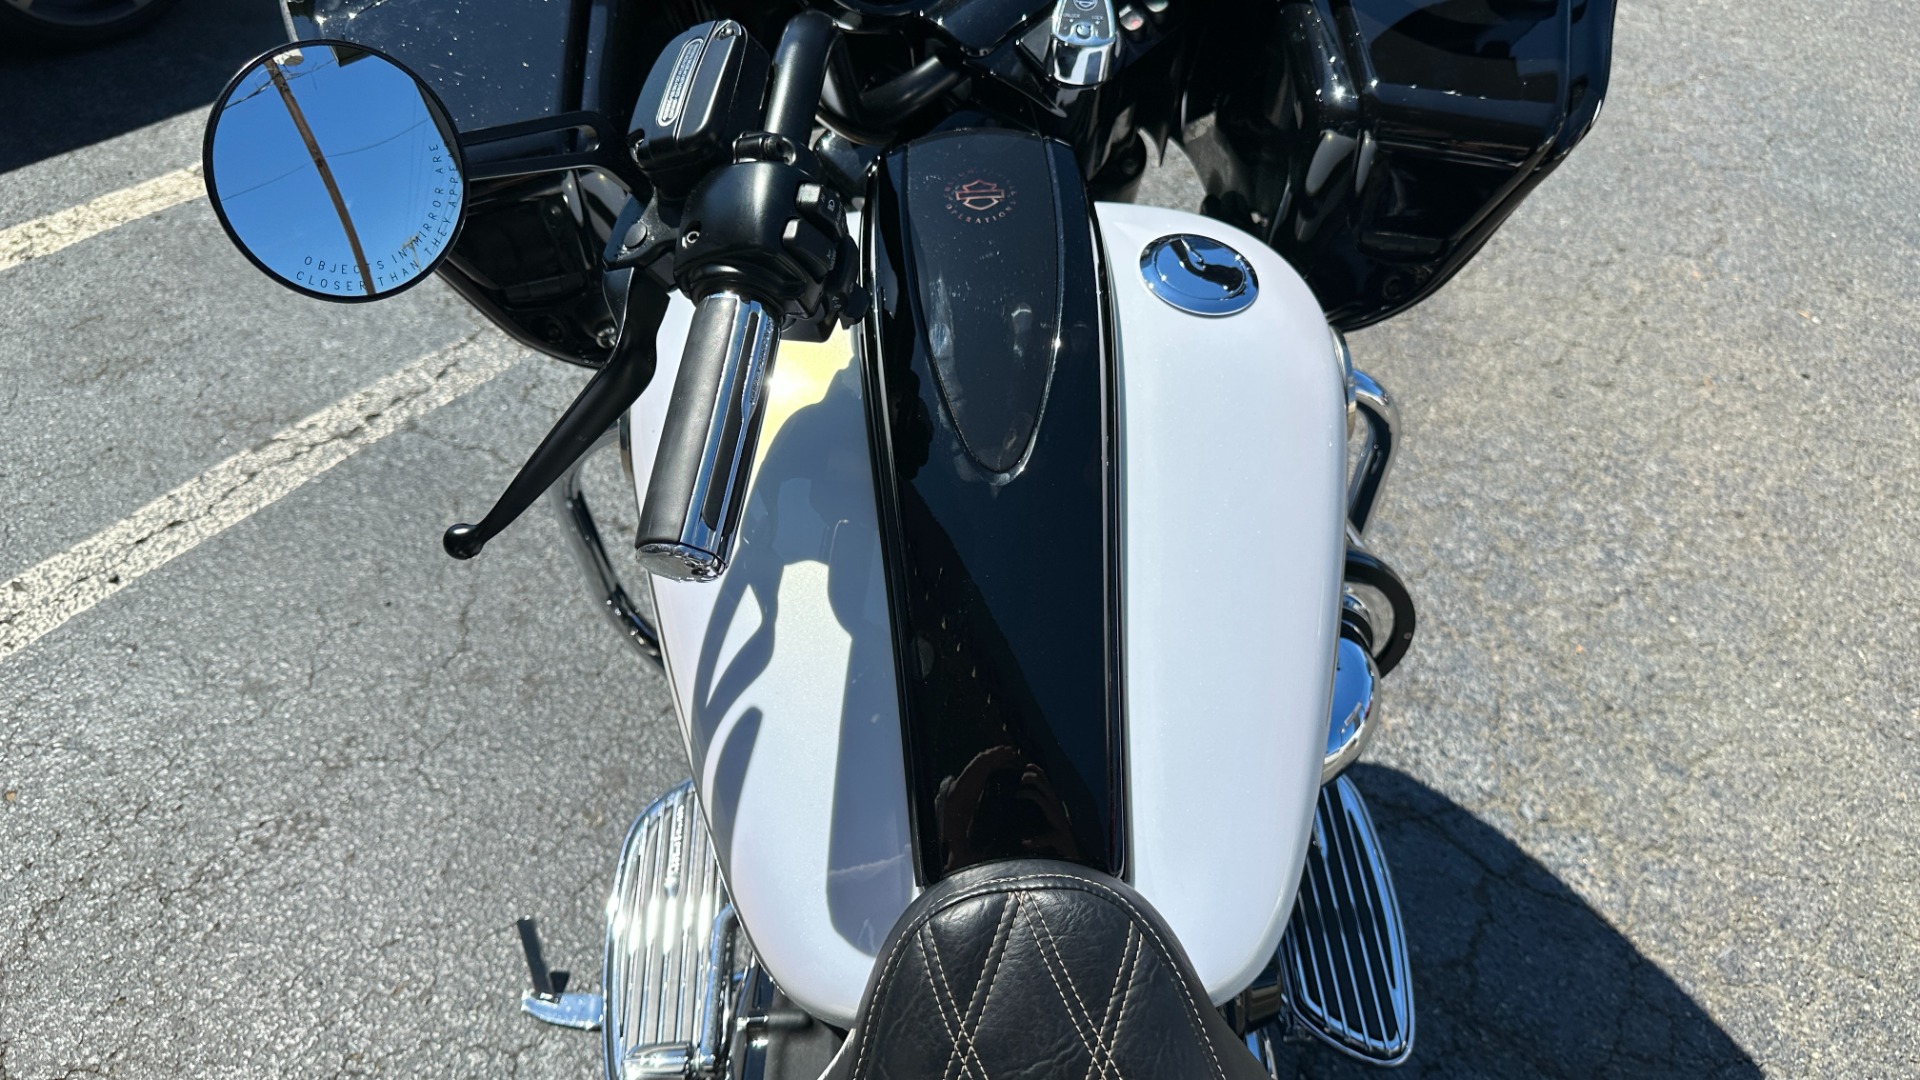 Used 2012 Harley Davidson FLTRXSE CVO Road Glide Custom CVO PAINT / RINEHART EXHAUST / SCREAMING EAGLE 110 ENGINE for sale $32,000 at Formula Imports in Charlotte NC 28227 54